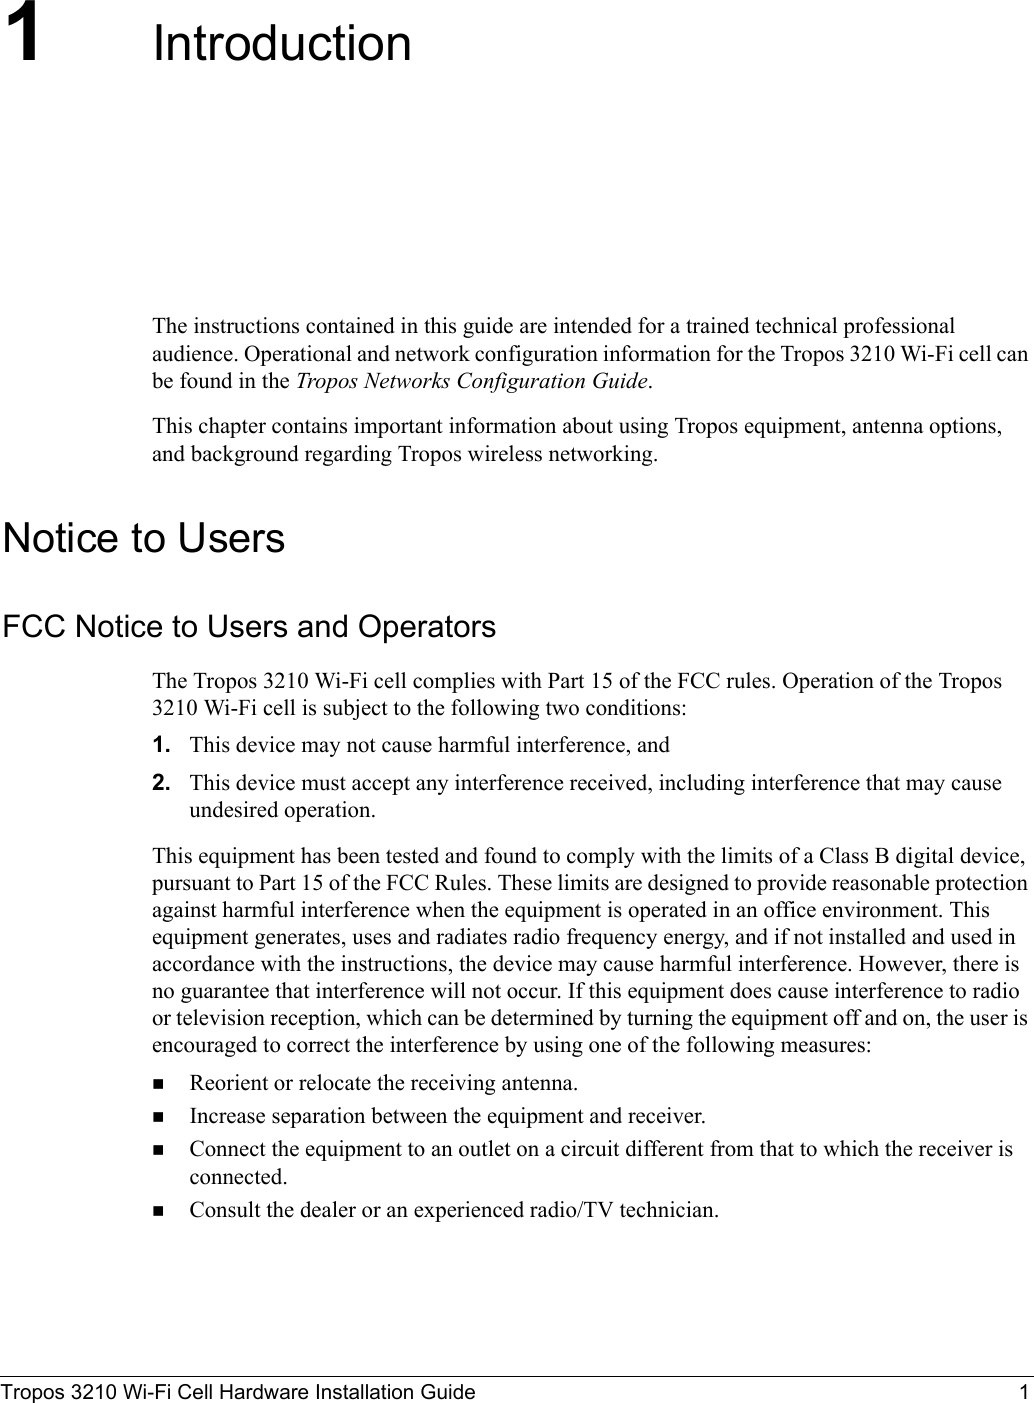 Tropos 3210 Wi-Fi Cell Hardware Installation Guide 11IntroductionThe instructions contained in this guide are intended for a trained technical professional audience. Operational and network configuration information for the Tropos 3210 Wi-Fi cell can be found in the Tropos Networks Configuration Guide. This chapter contains important information about using Tropos equipment, antenna options, and background regarding Tropos wireless networking. Notice to UsersFCC Notice to Users and OperatorsThe Tropos 3210 Wi-Fi cell complies with Part 15 of the FCC rules. Operation of the Tropos 3210 Wi-Fi cell is subject to the following two conditions:1. This device may not cause harmful interference, and2. This device must accept any interference received, including interference that may cause undesired operation.This equipment has been tested and found to comply with the limits of a Class B digital device, pursuant to Part 15 of the FCC Rules. These limits are designed to provide reasonable protection against harmful interference when the equipment is operated in an office environment. This equipment generates, uses and radiates radio frequency energy, and if not installed and used in accordance with the instructions, the device may cause harmful interference. However, there is no guarantee that interference will not occur. If this equipment does cause interference to radio or television reception, which can be determined by turning the equipment off and on, the user is encouraged to correct the interference by using one of the following measures:Reorient or relocate the receiving antenna. Increase separation between the equipment and receiver. Connect the equipment to an outlet on a circuit different from that to which the receiver is connected. Consult the dealer or an experienced radio/TV technician.